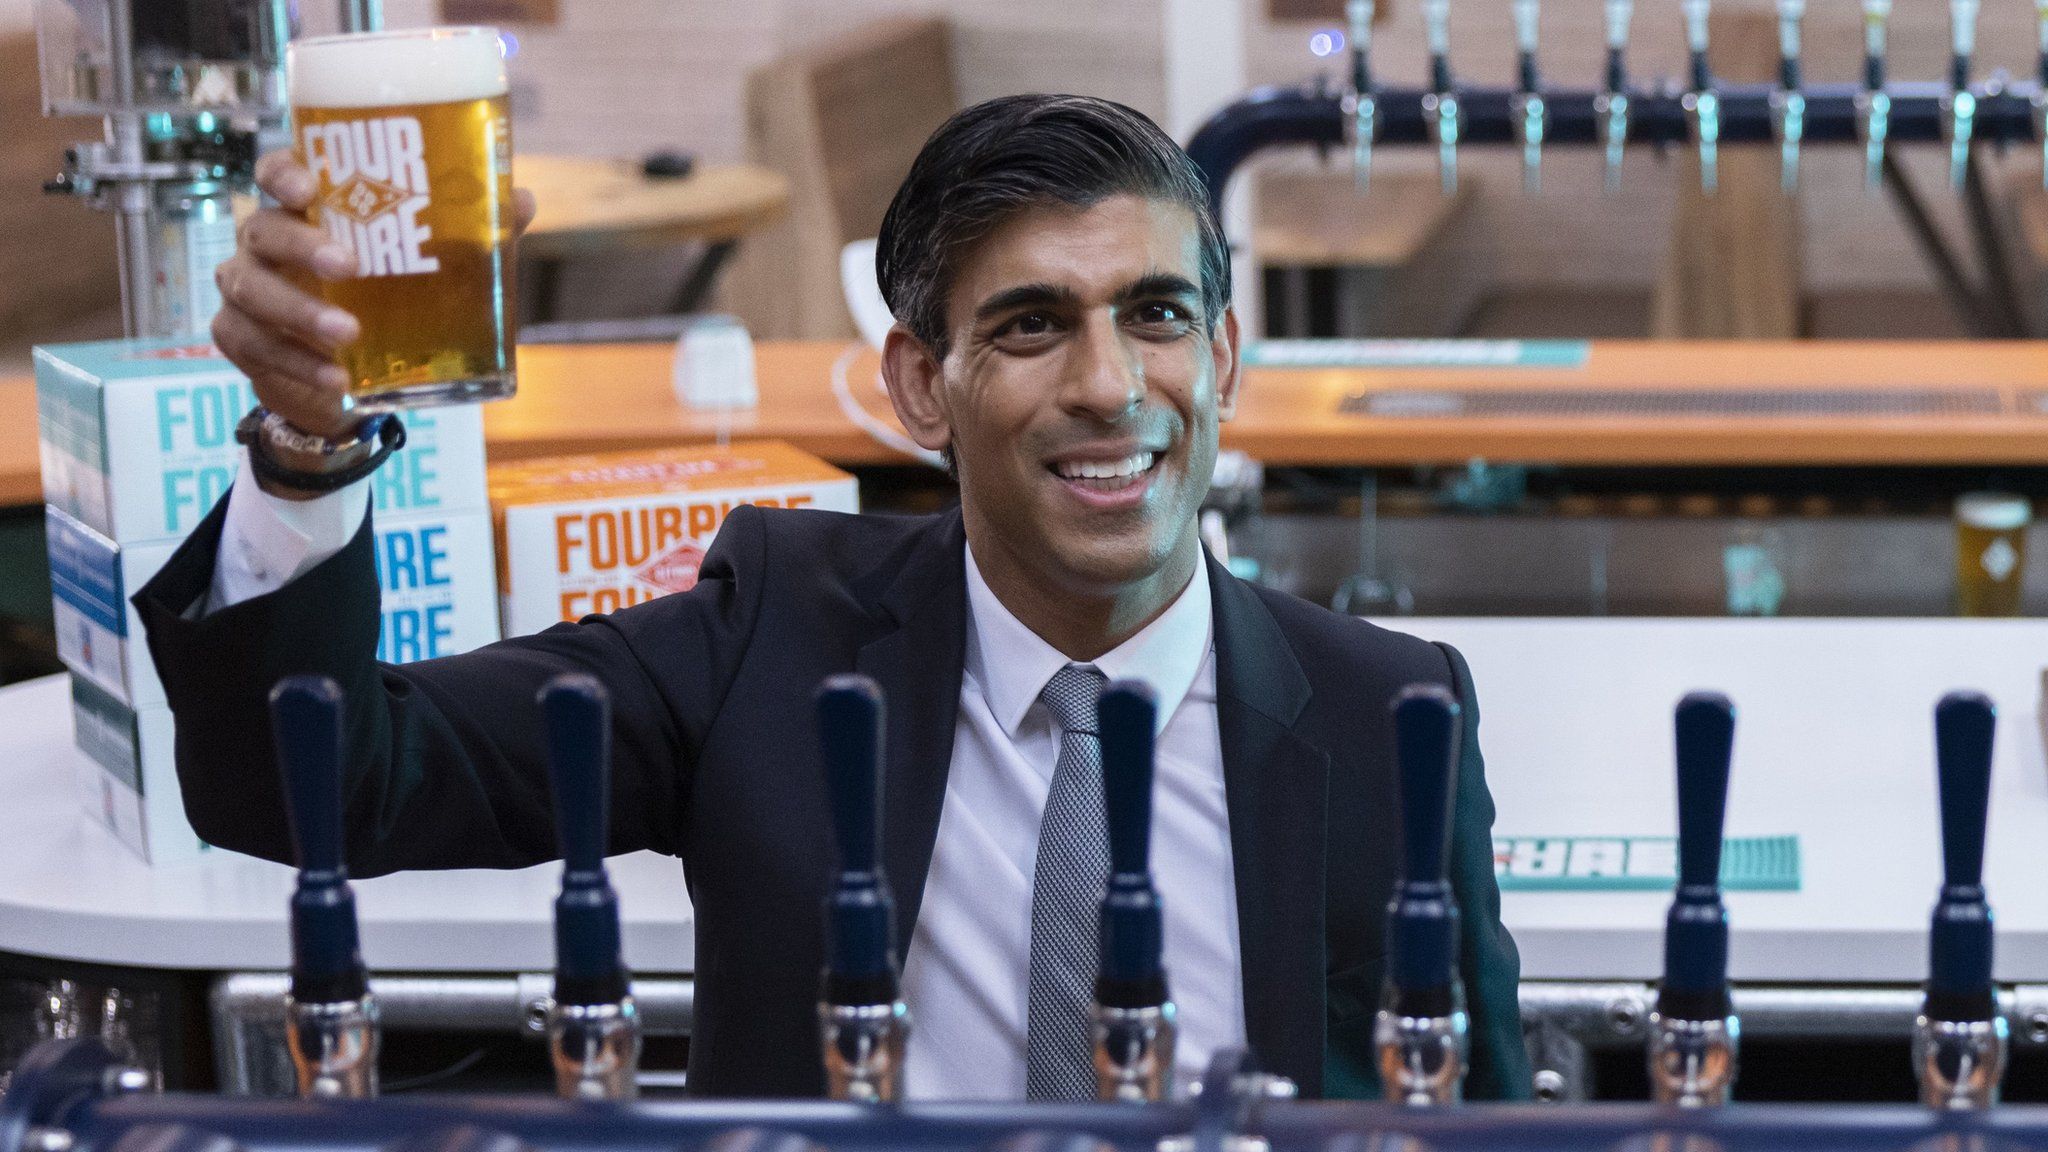 Chancellor of the Exchequer Rishi Sunak during a visit to Fourpure Brewery in Bermondsey, London, after he delivered his Budget to the House of Commons.